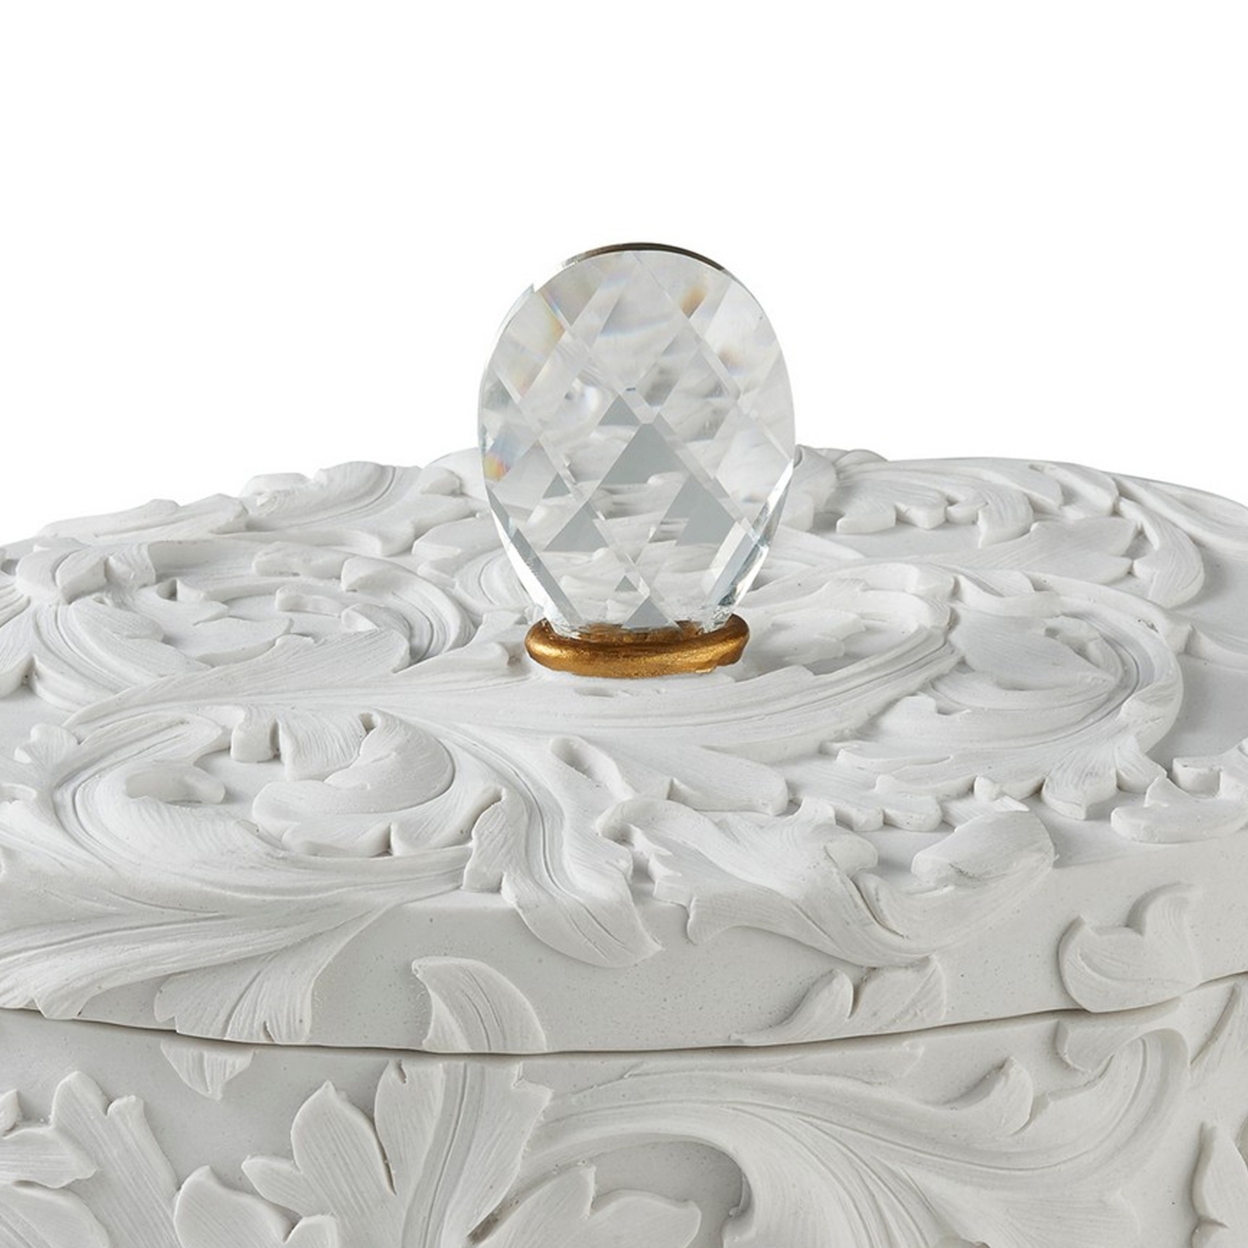 Jewelry Box With Baroque Scroll Design And Crystal Accent, White- Saltoro Sherpi